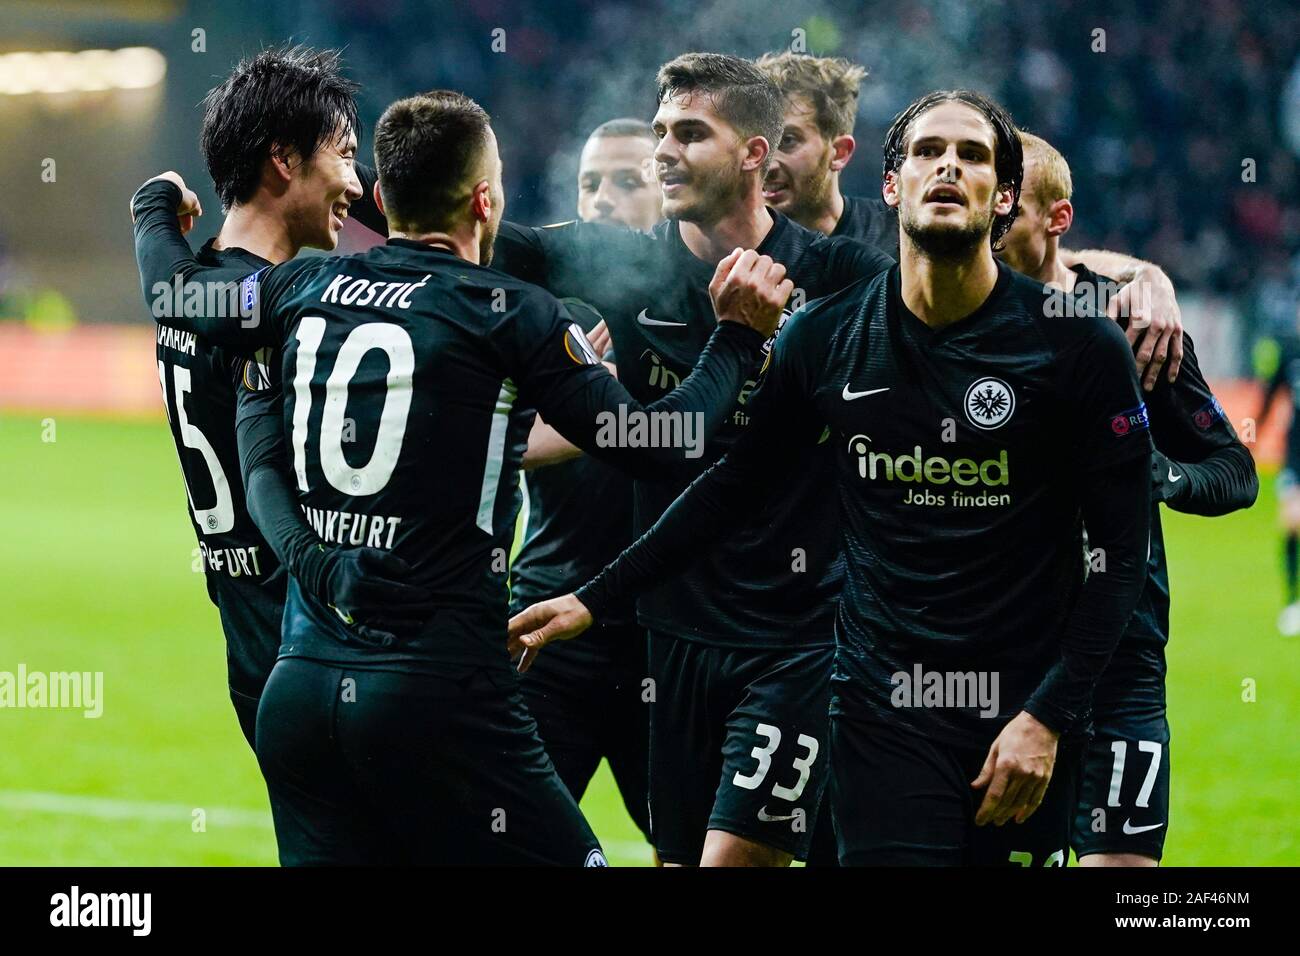 12 December 2019, Hessen, Frankfurt/Main: Soccer: Europa League, Eintracht Frankfurt - Vitoria Guimaraes, Group stage, Group F, 6th matchday, in the Commerzbank Arena. Frankfurt's Daichi Kamada (l-r) cheers with team-mates Philip Kostic, Andre Silva and Goncalo Pacuiencia over the goal to 2:1. Photo: Uwe Anspach/dpa Stock Photo